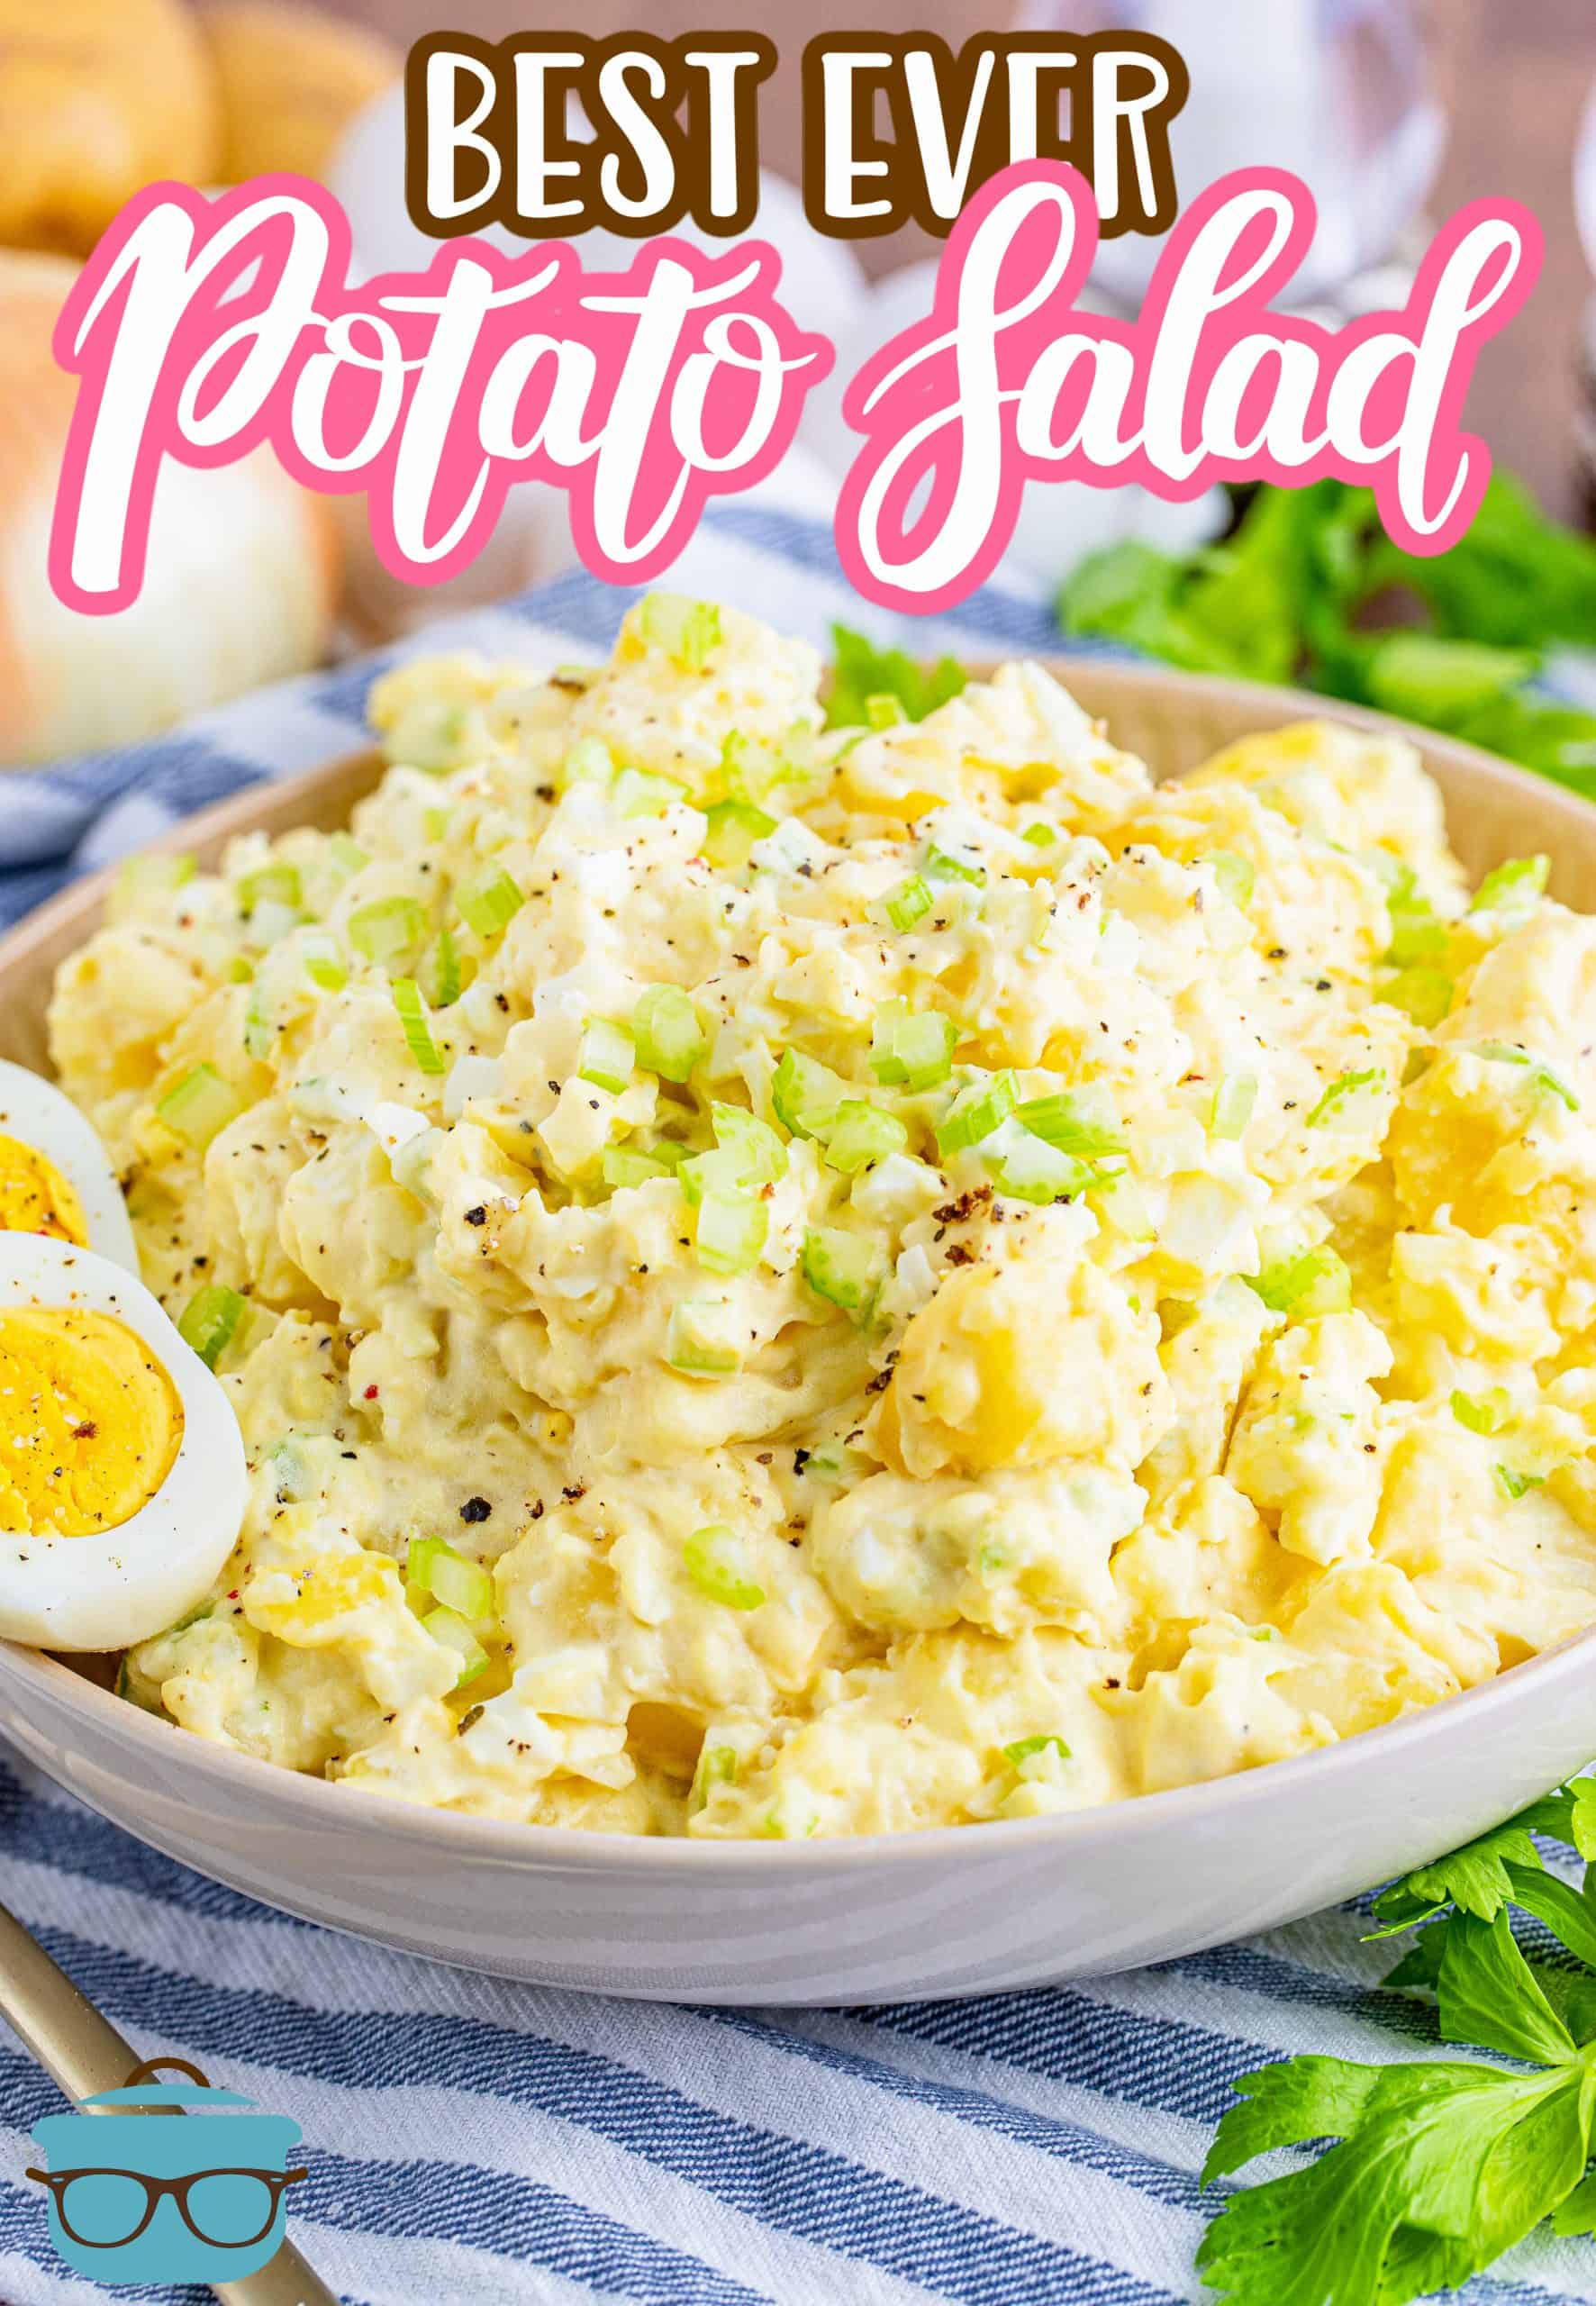 The Best Ever Potato Salad recipe from The Country Cook, potato salad shown in a large shallow bowl with a slice hard boiled egg on the side of the bowl.